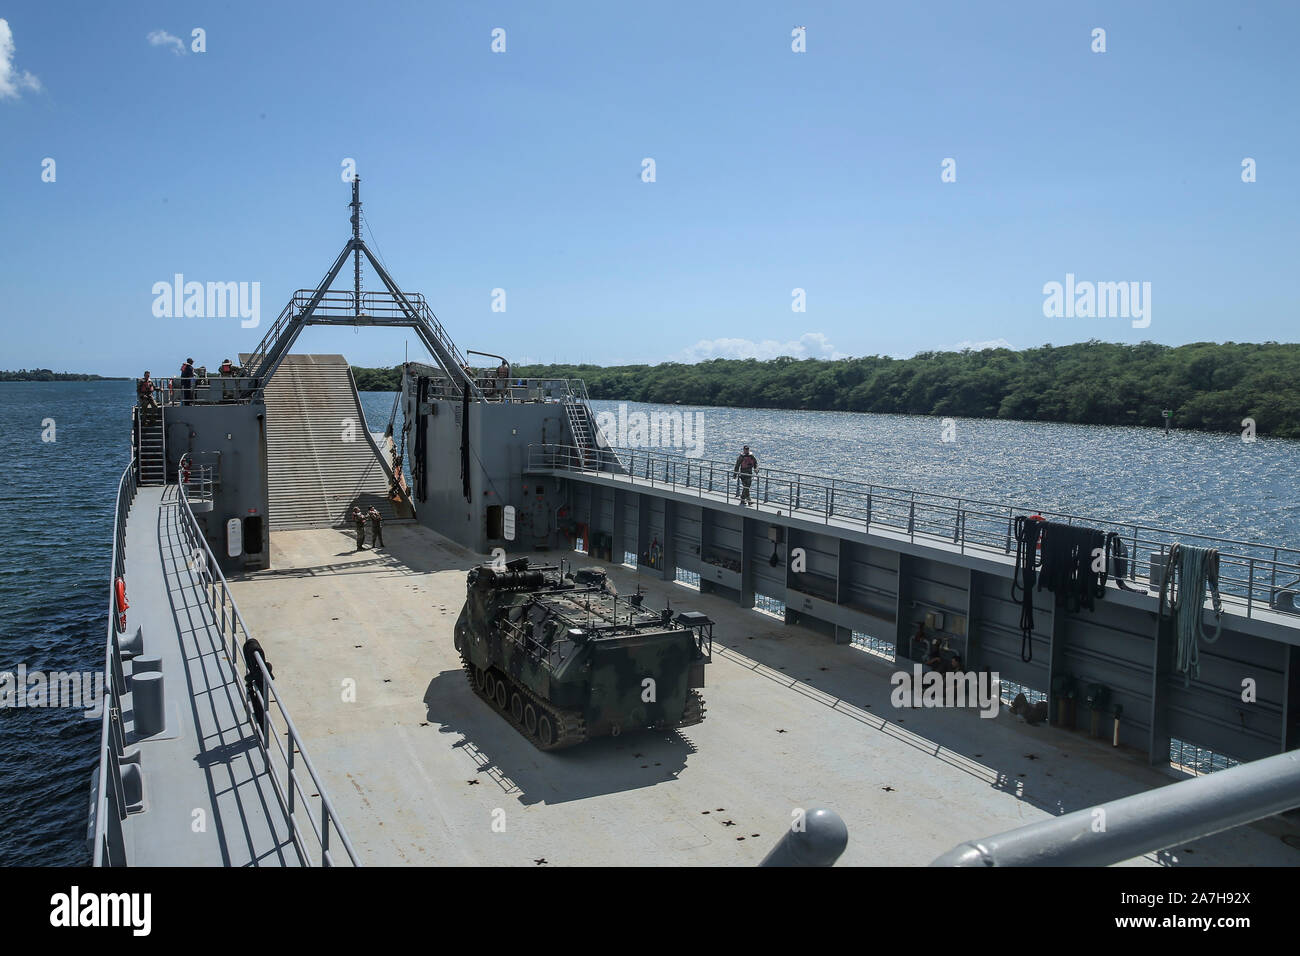 A U.S. Marine Corps AAV-P7/A1 Amphibious Assault Vehicle aboard U.S. Army logistics support vessel USAV CW3 Harold C. Clinger (LSV-2) waits to be transferred to the USS New Orleans (LPD-18) as part of an Army to Navy, ship-to-ship transfer of Marine Corps assets at Joint Base Pearl Harbor-Hickam, Hawaii, Oct. 24, 2019. The evolution further developed the services’ joint operational capabilities, interoperability and flexibility in the Indo-Pacific region. (U.S. Marine Corps photo by Lance Cpl. Nunez) Stock Photo